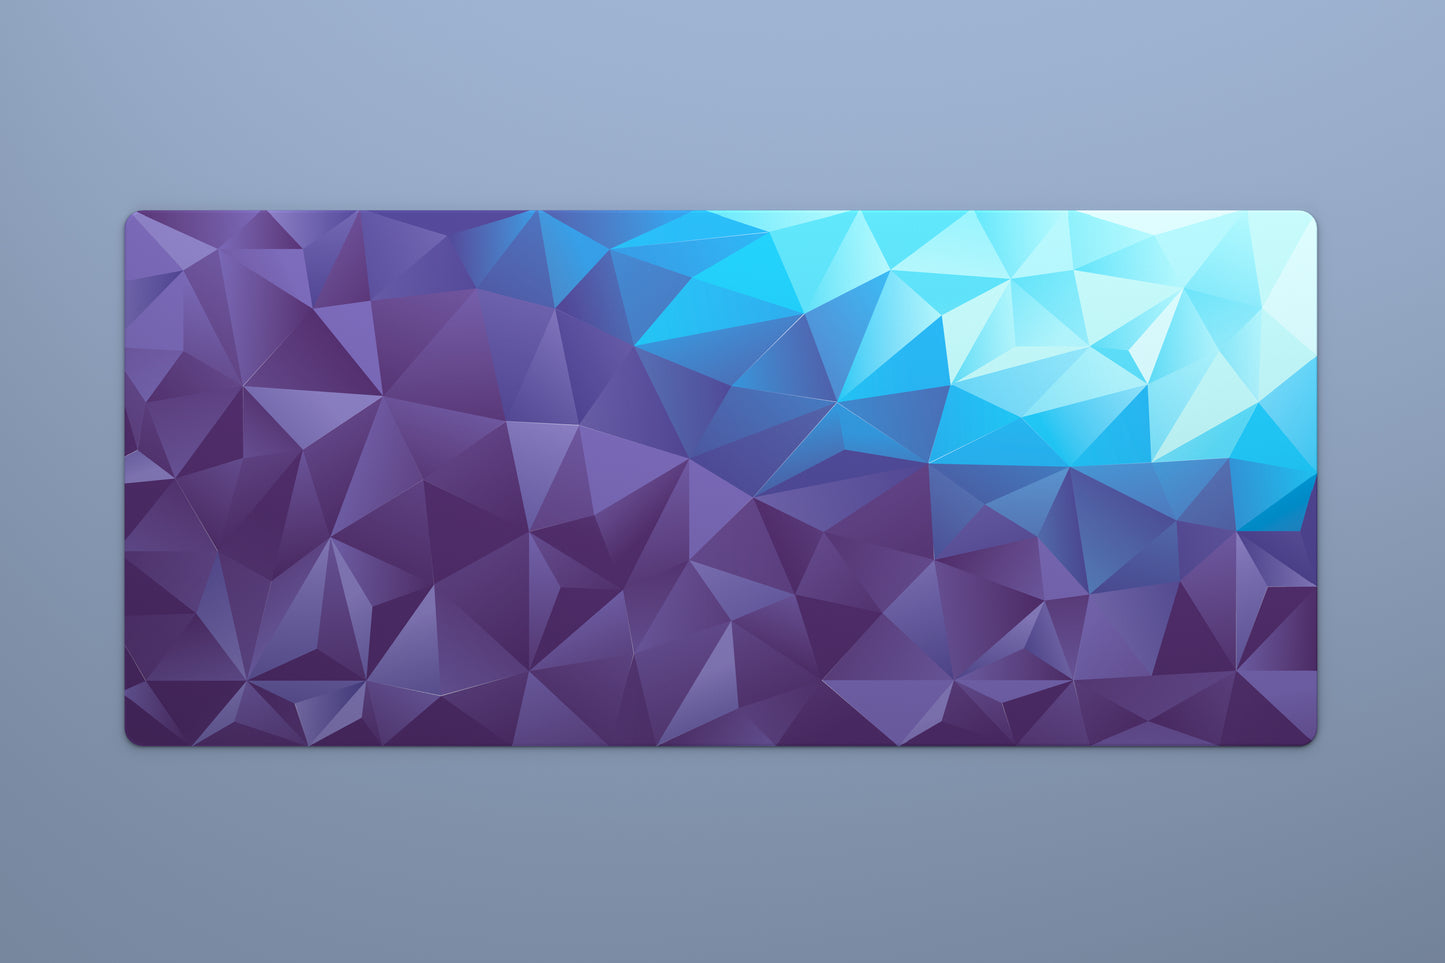 Overhead shot of a large 900 by 400 millimeter mousepad with a purple to blue geometric gradient pattern